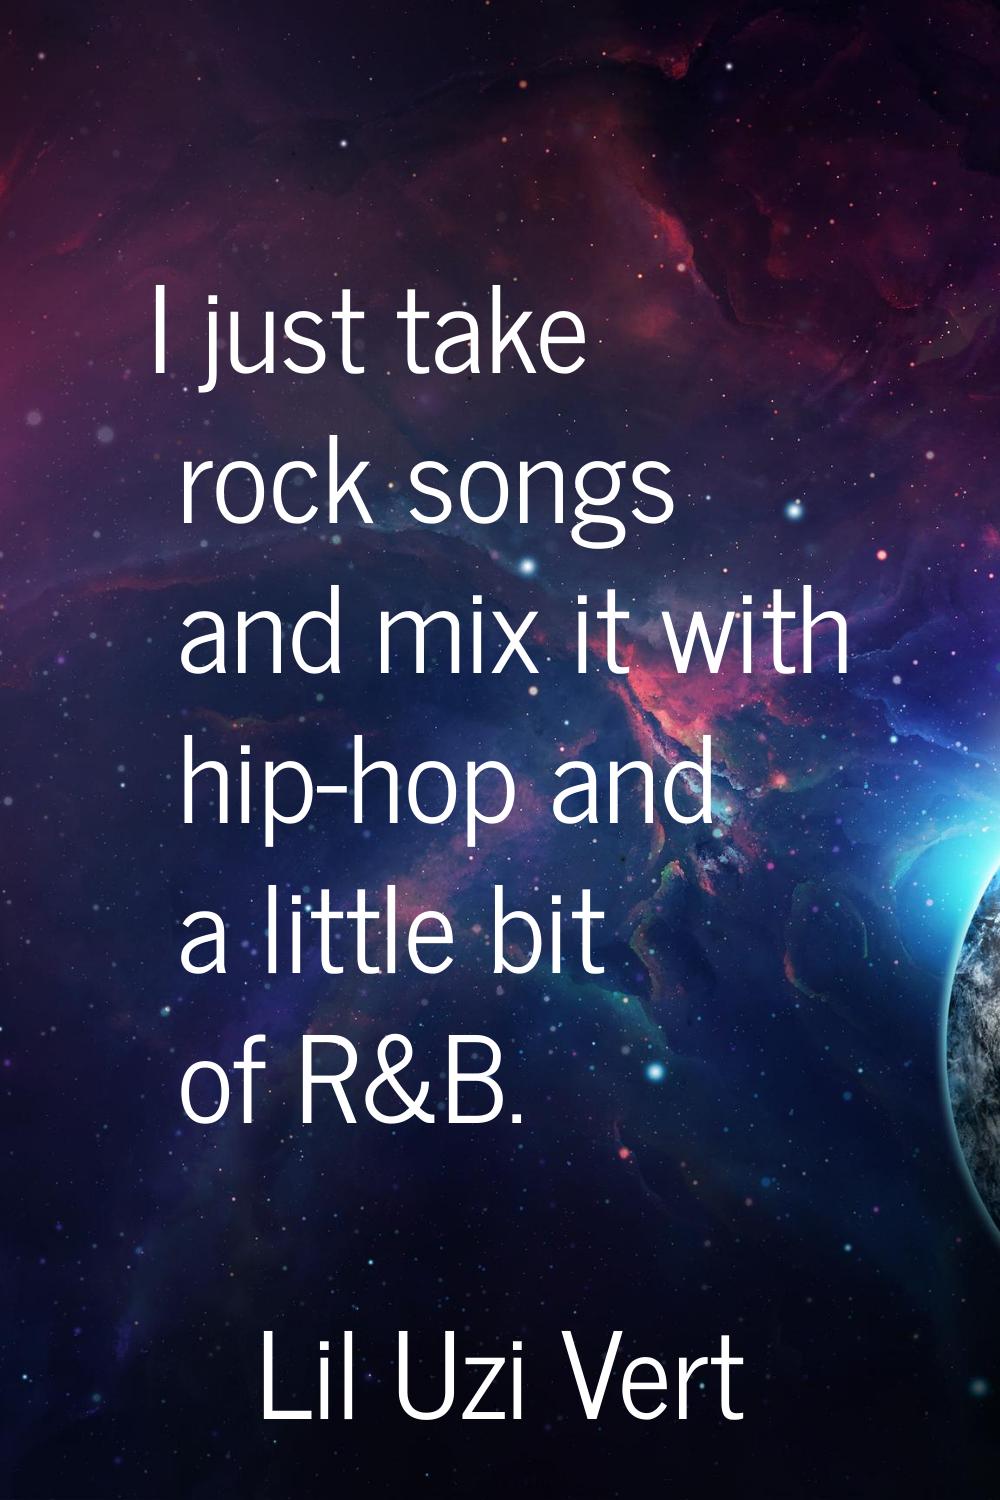 I just take rock songs and mix it with hip-hop and a little bit of R&B.